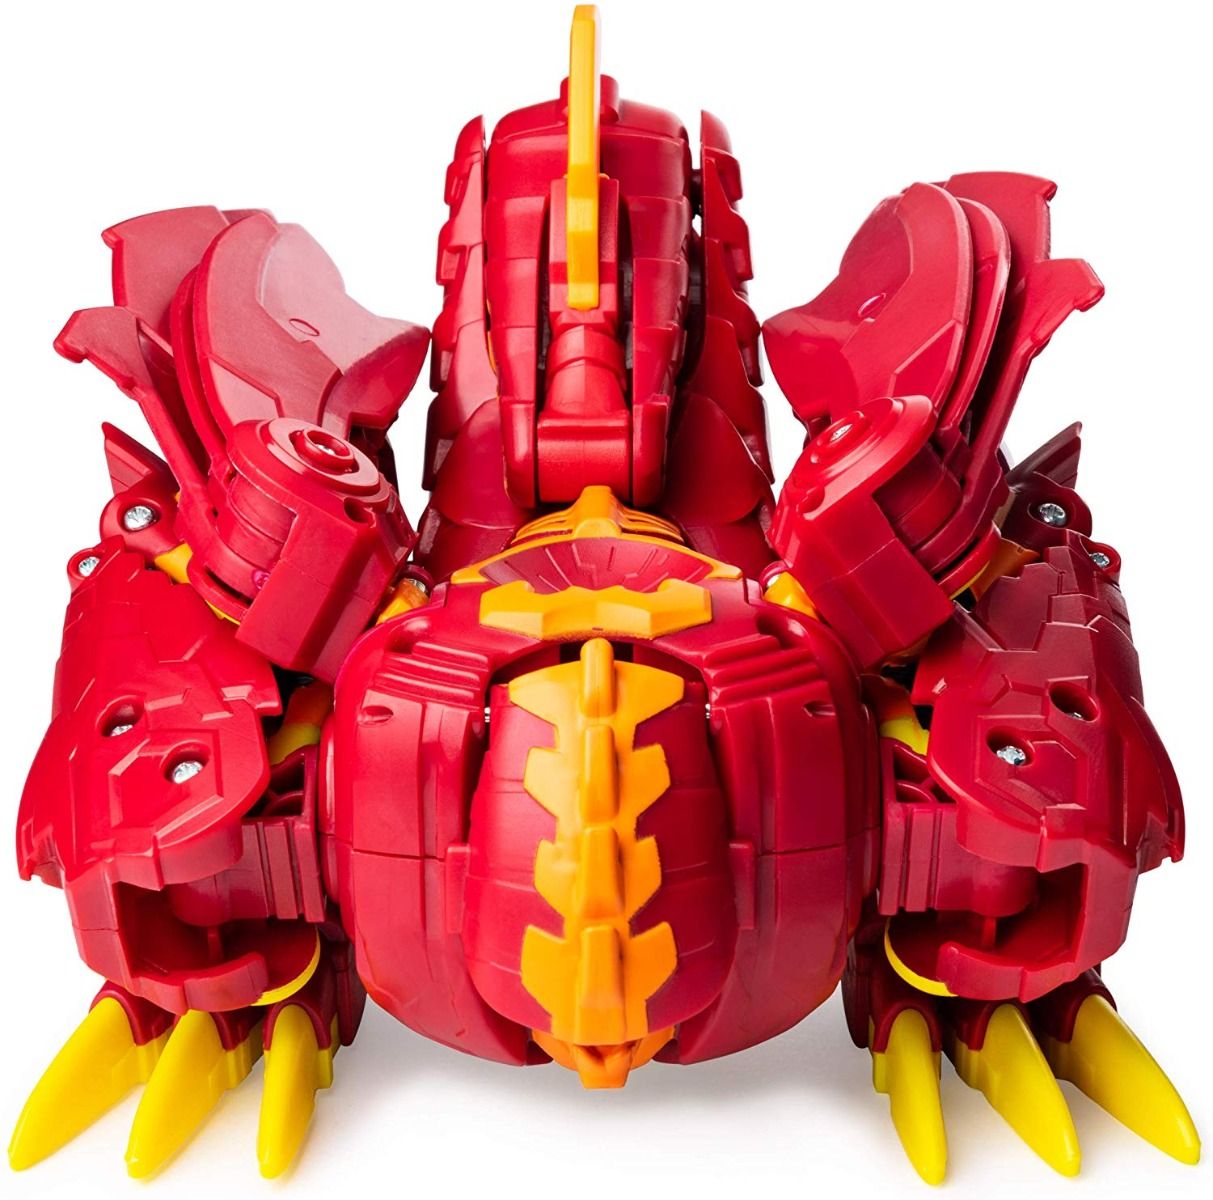 New Bakugan Dragonoid Maximus Toy Transforming Figure with Lights and SoundTM 